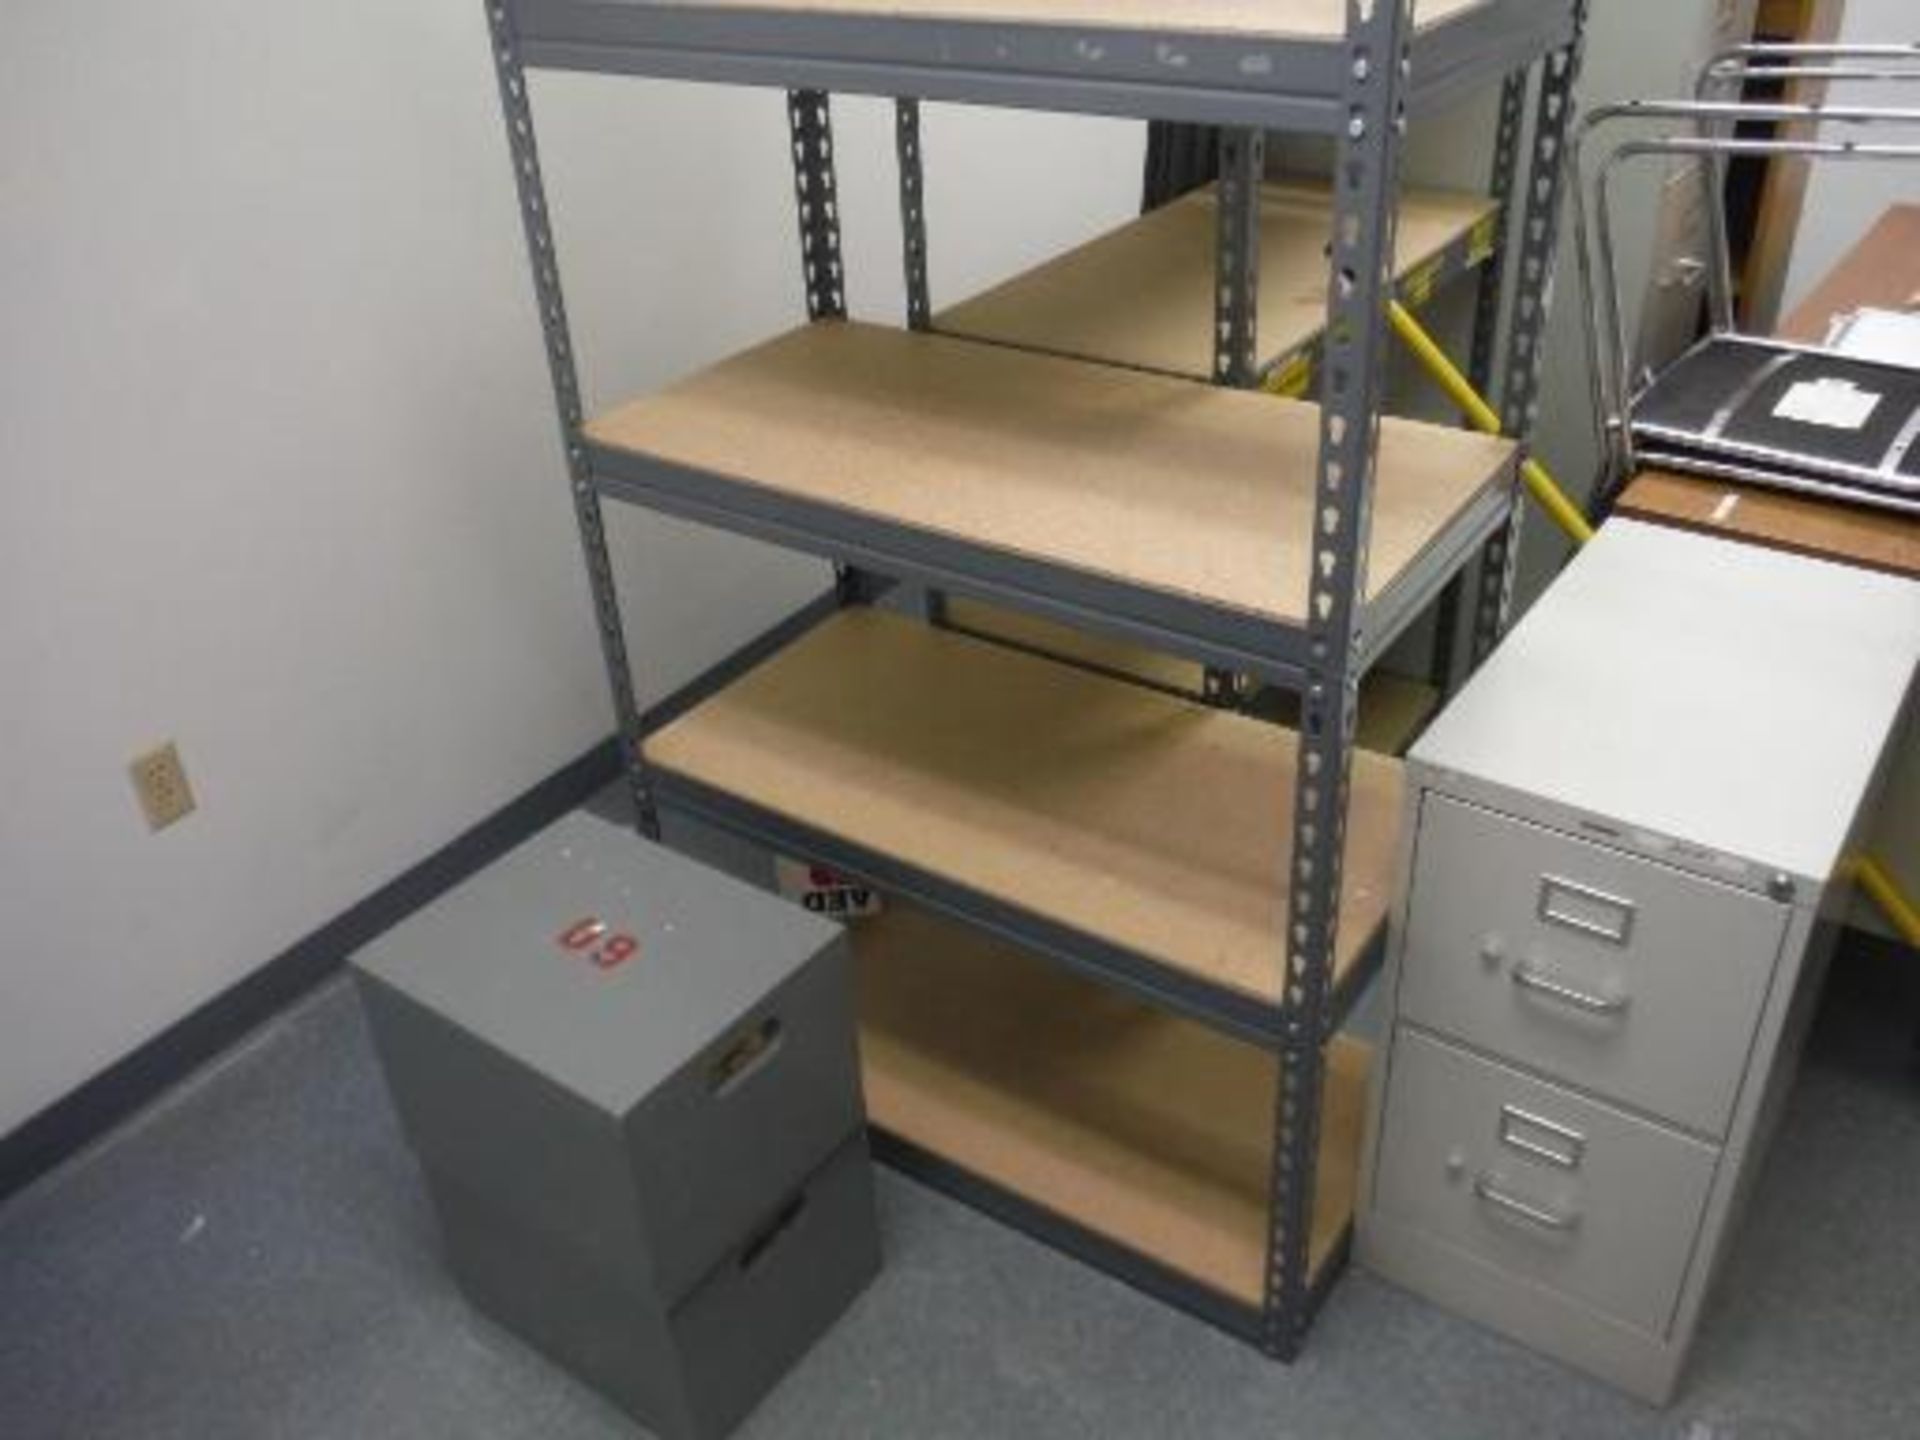 Contents of Office, desk, chairs, file cabinets, and storage shelves. Located in Marion, Ohio - Image 2 of 4